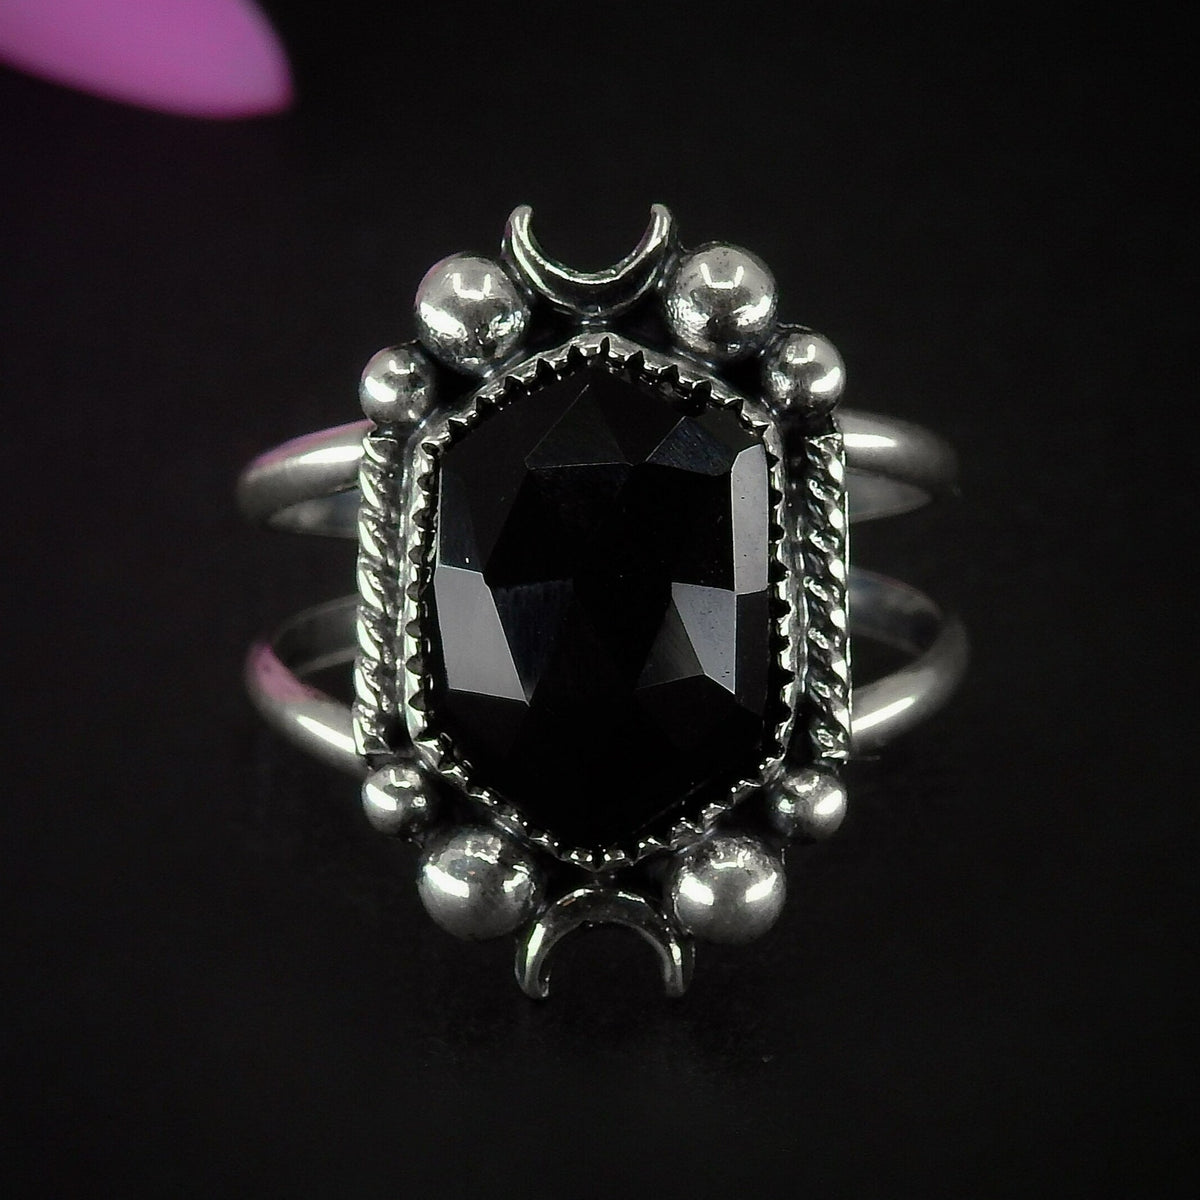 Rose Cut Black Onyx Ring - Size 9 1/4 - Sterling Silver - Hexagonal Onyx Ring - Faceted Onyx Moon Ring, Black Gemstone Crescent Moon Jewelry